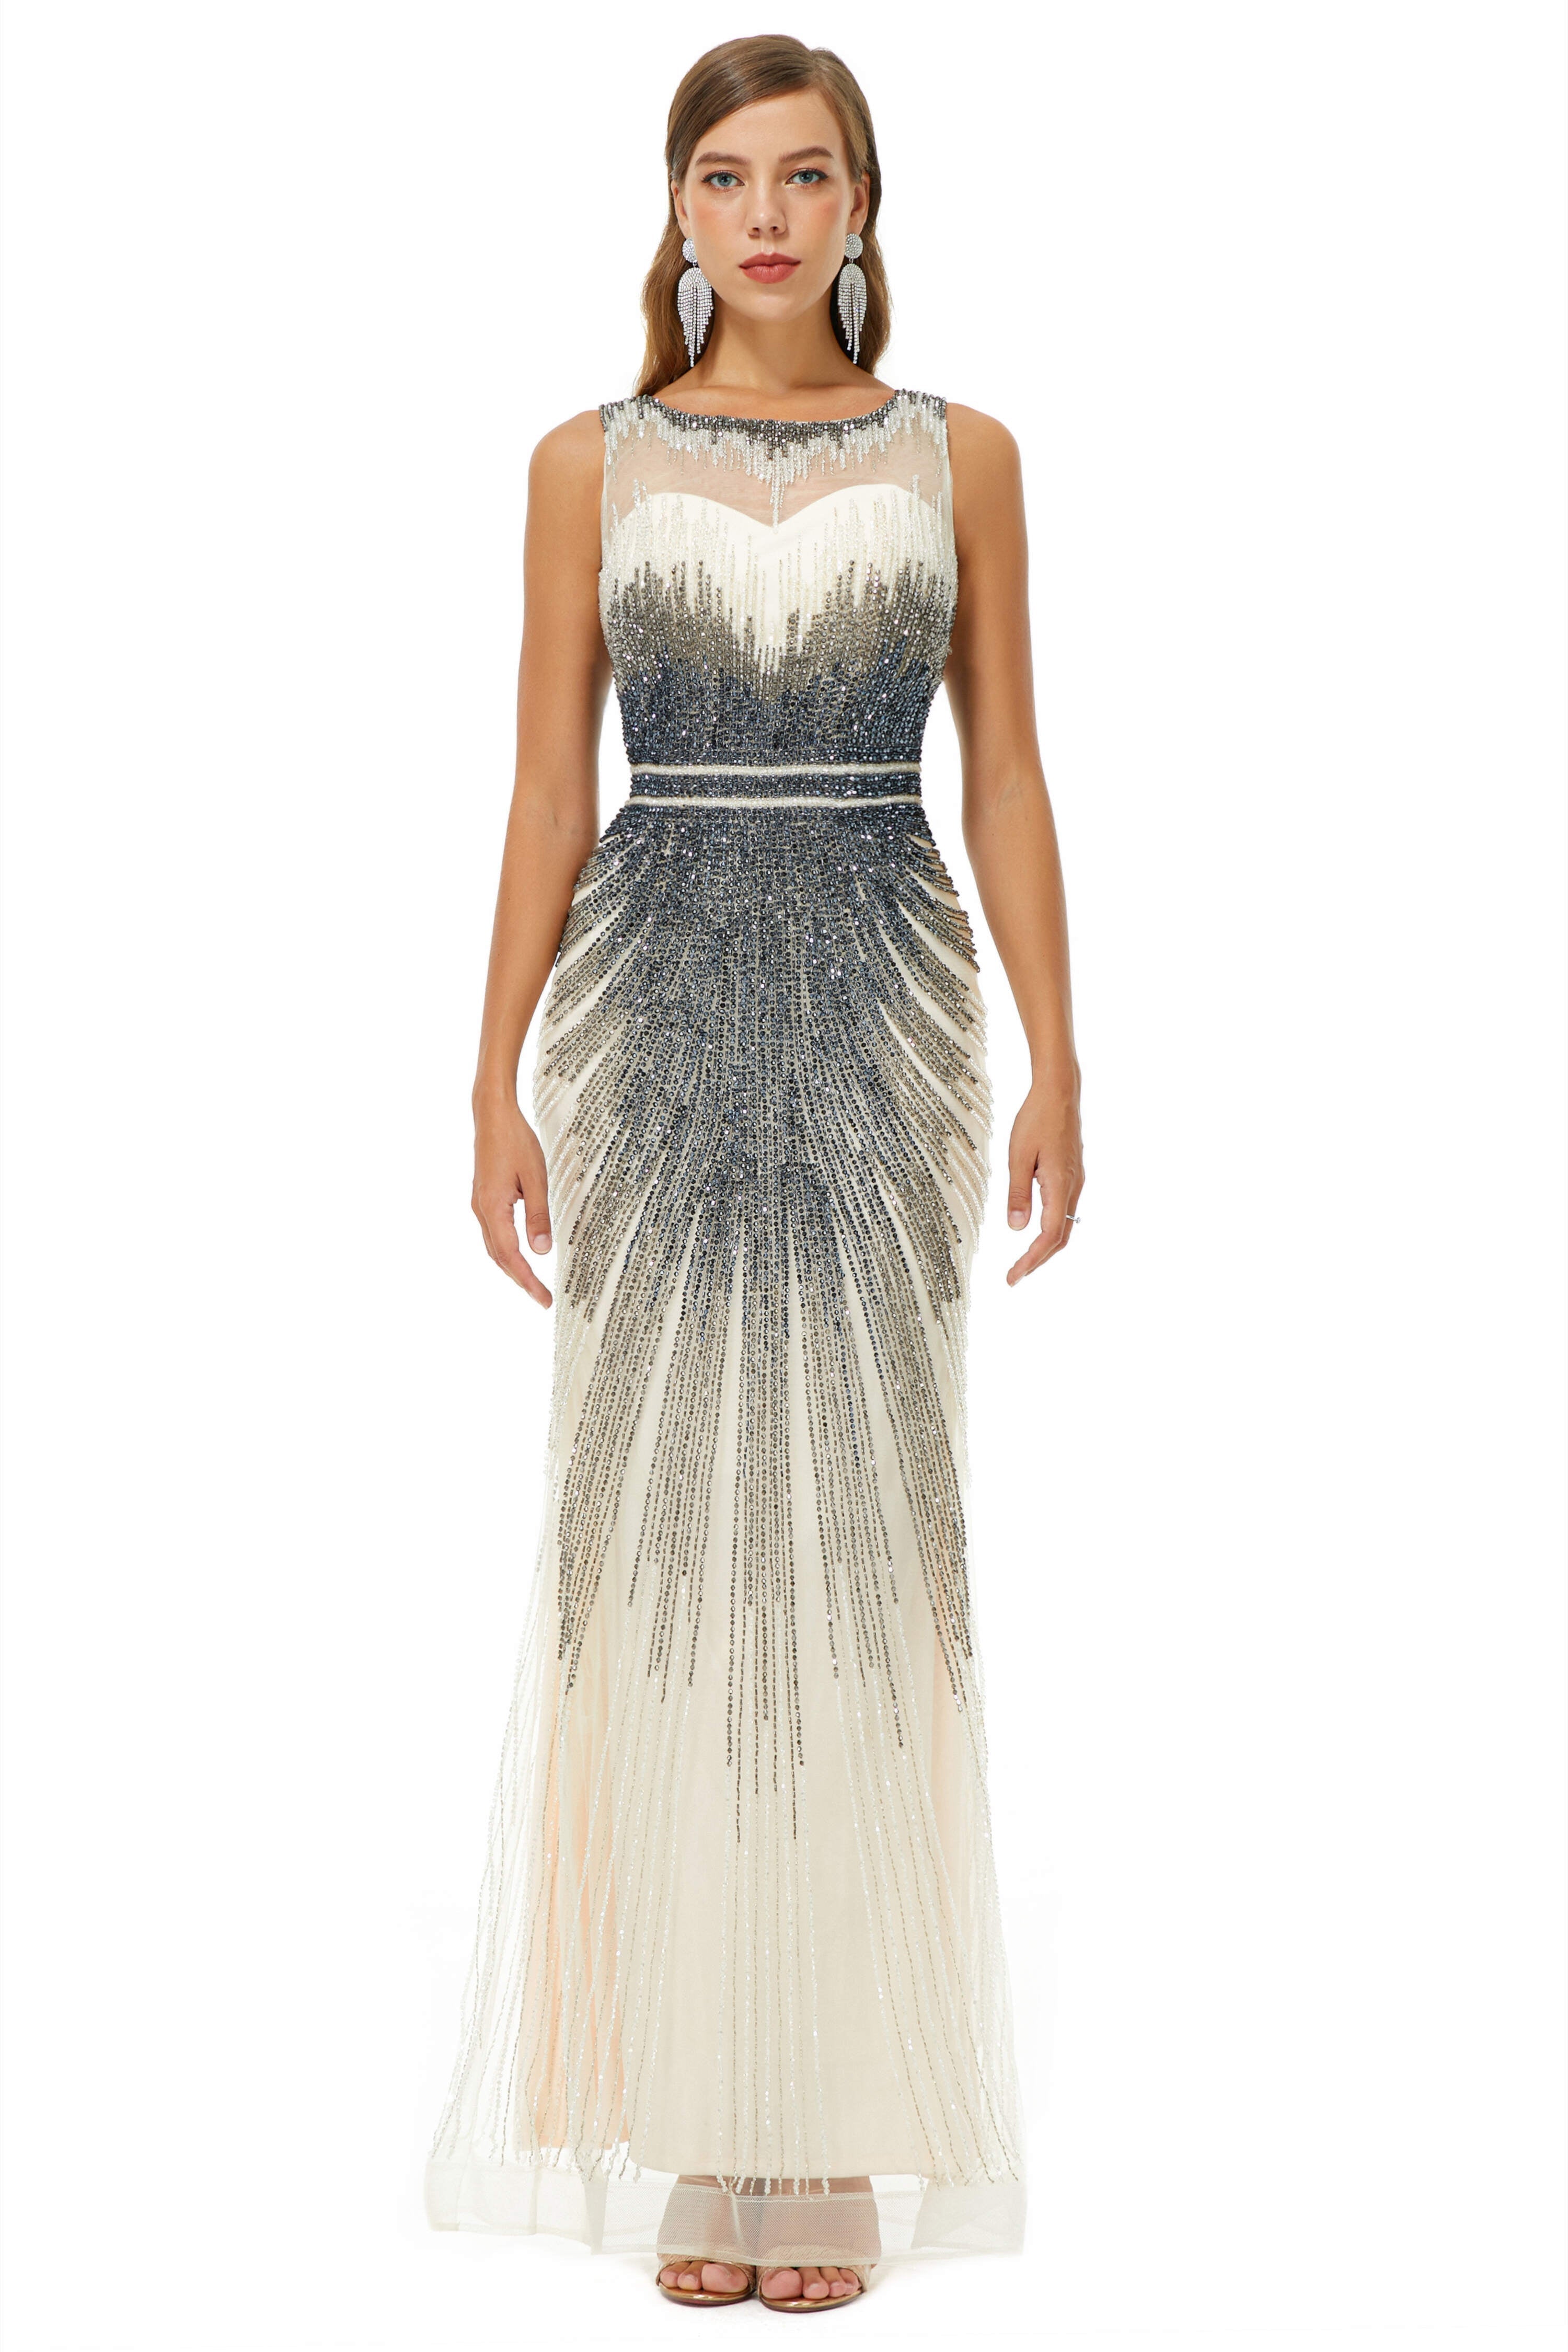 Sequin Bead Sleeveless High Neck Mermaid Corset Prom Dresses outfit, Prom Dress Shop Near Me